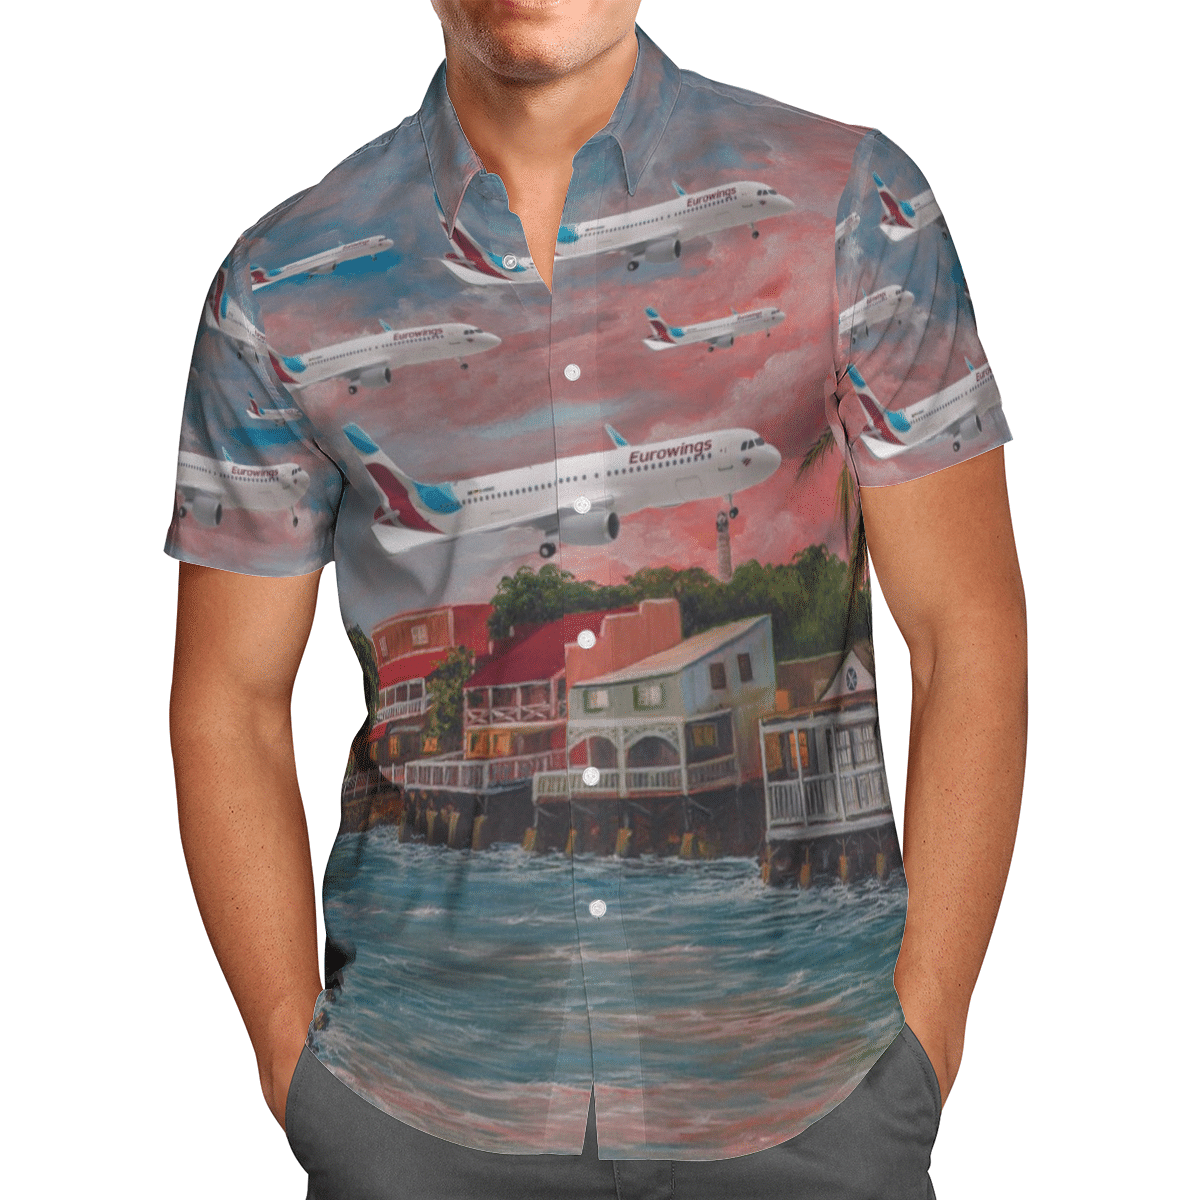 HOT Eurowings Airbus A320-200 All Over Print Tropical Shirt1